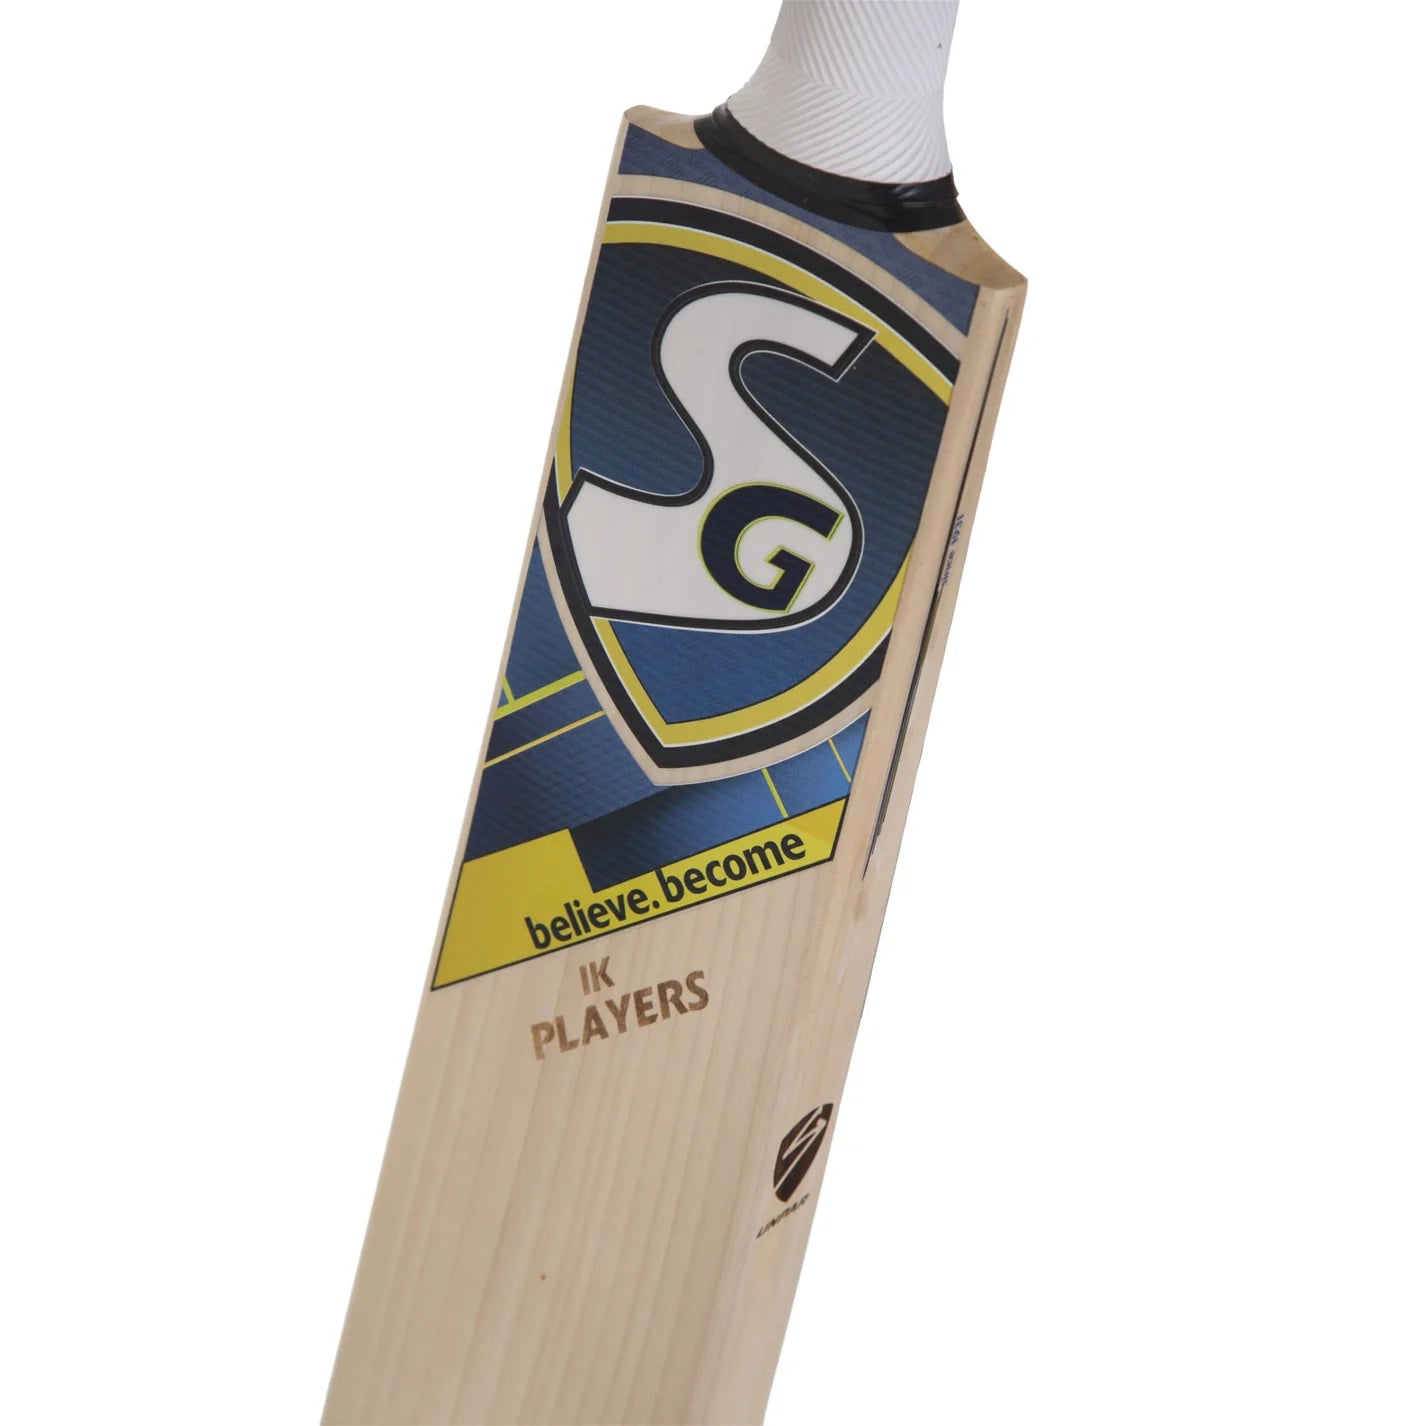 SG IK Players Grade 1 Worlds Finest and rare top grade English Willow highest quality and performance Bat (with SG|Str8bat Sensor)